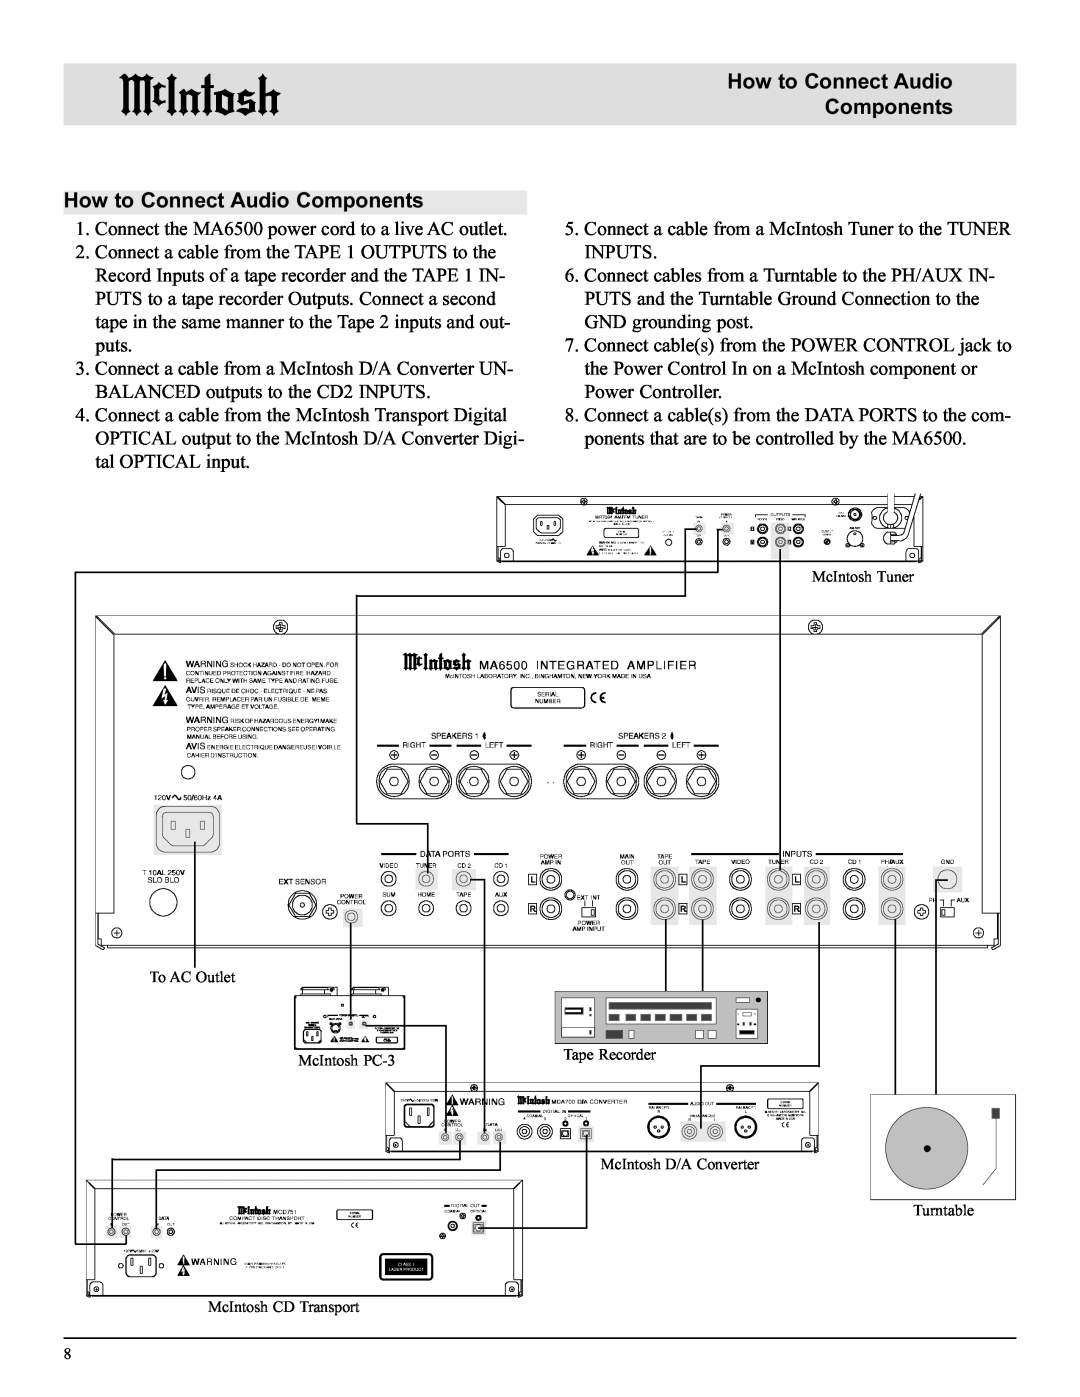 McIntosh MA6500 manual How to Connect Audio Components, McIntosh Tuner, To AC Outlet, McIntosh PC-3, Tape Recorder 